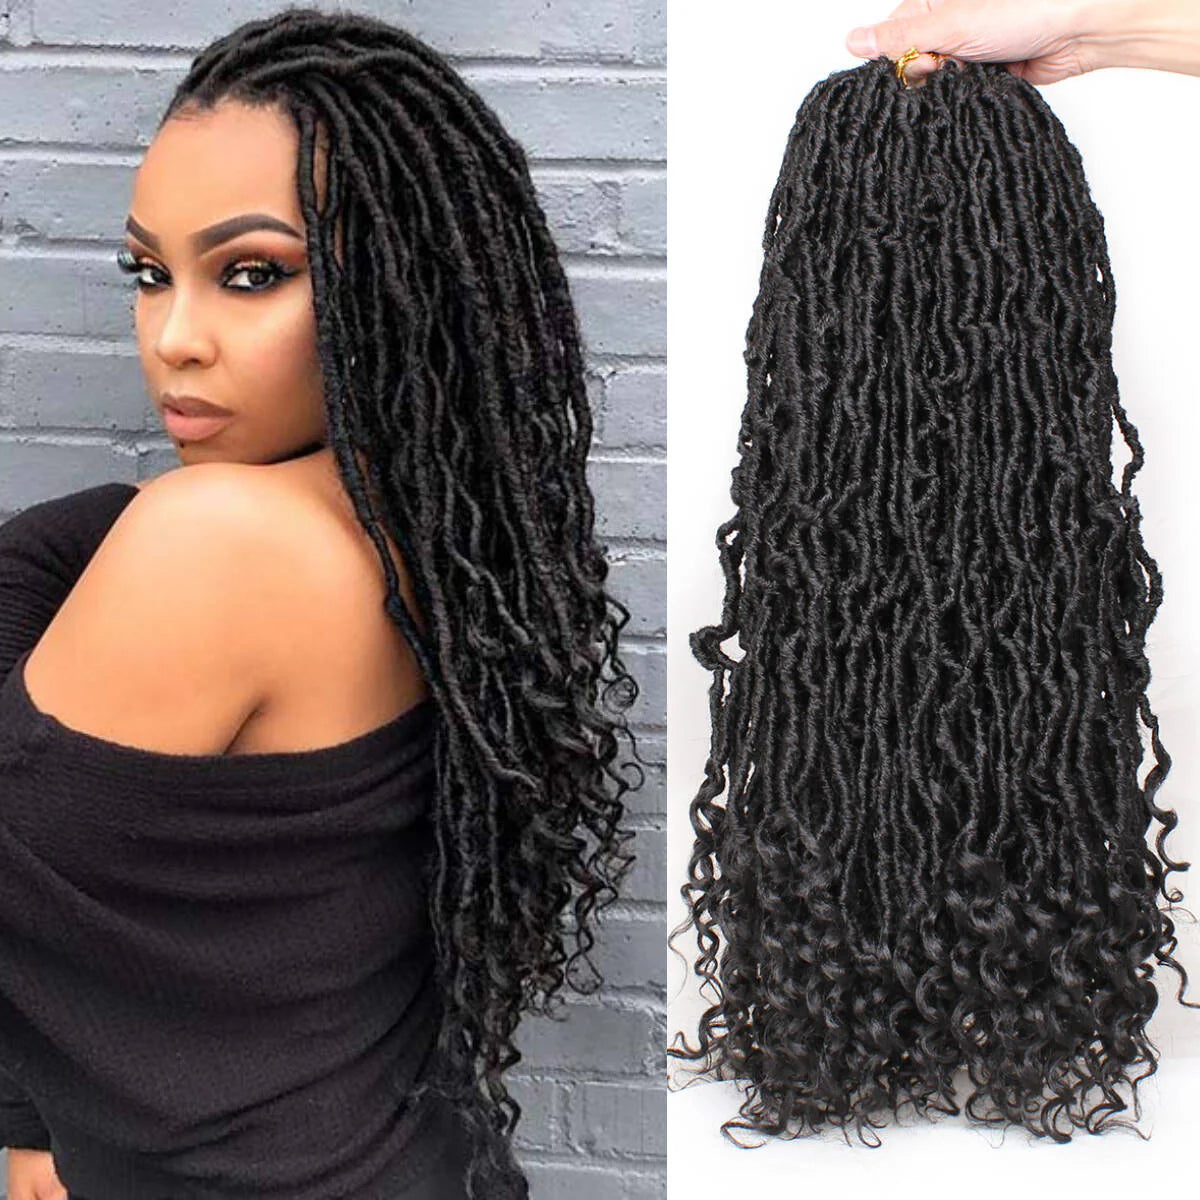 Toyotress Faux Locs With Curly Ends Goddess Locs Crochet Hair Curly Faux Locs Crochet Hair Wavy Nu Locs with Curly Ends Synthetic Braiding Hair